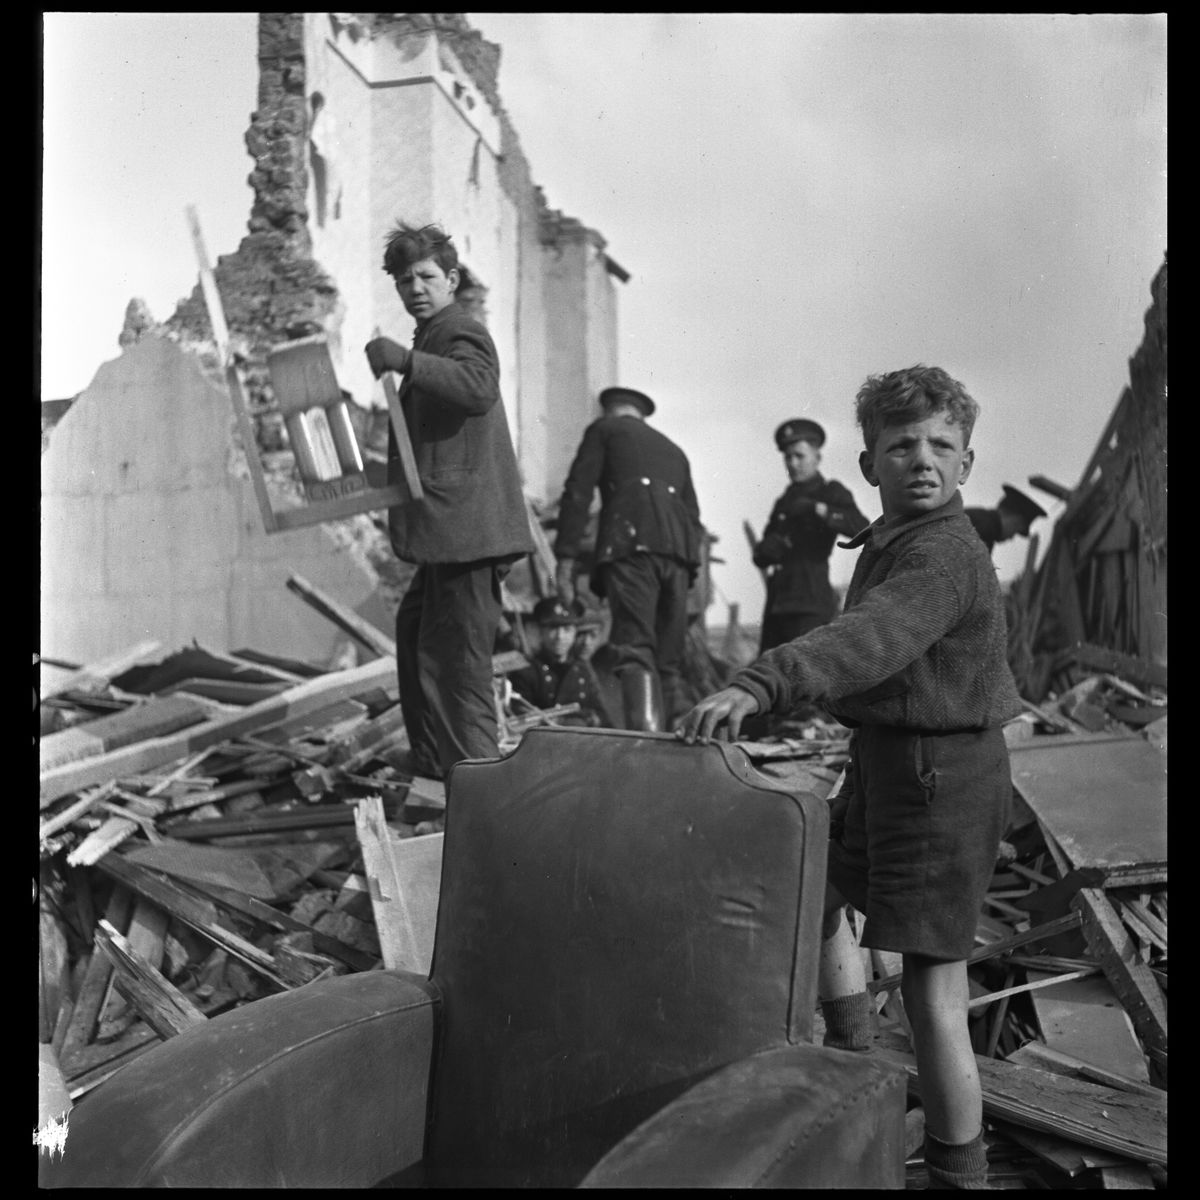 People and wreckage of buildings after a bombing raid of London during World War II in January 1945.